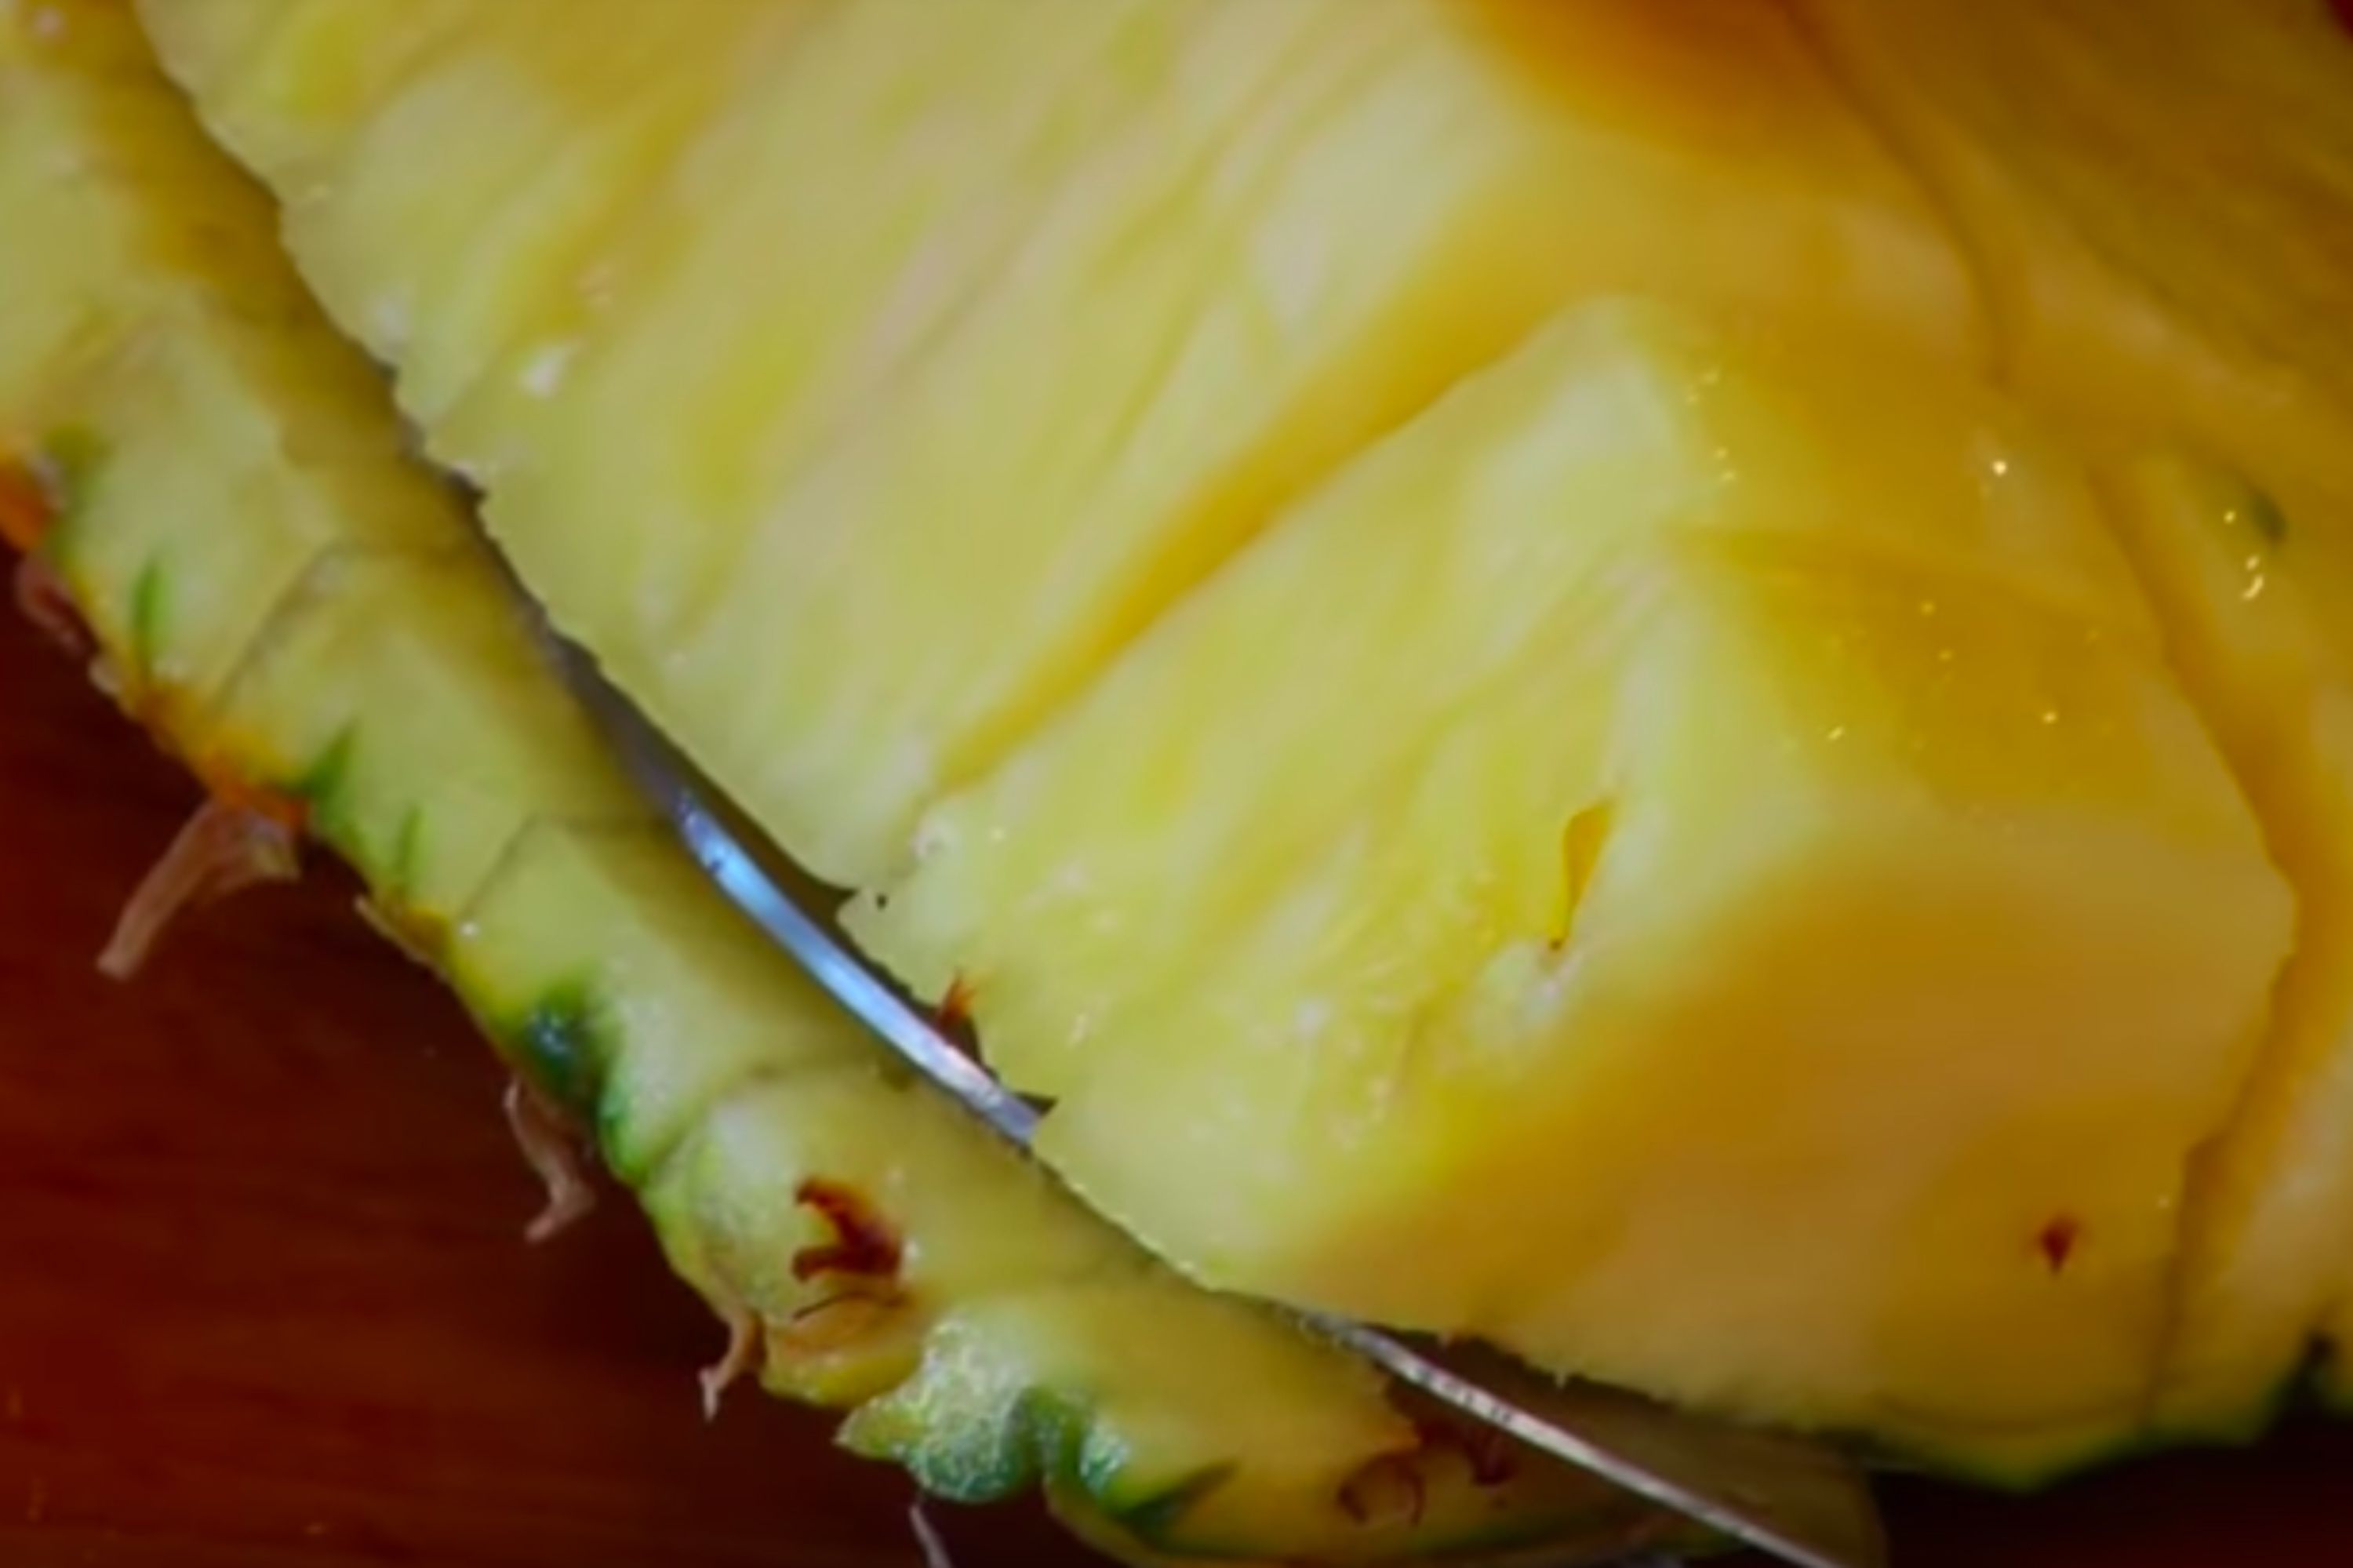 How to Cut a Pineapple Easily - Cutting Up a Pineapple in 4 Steps